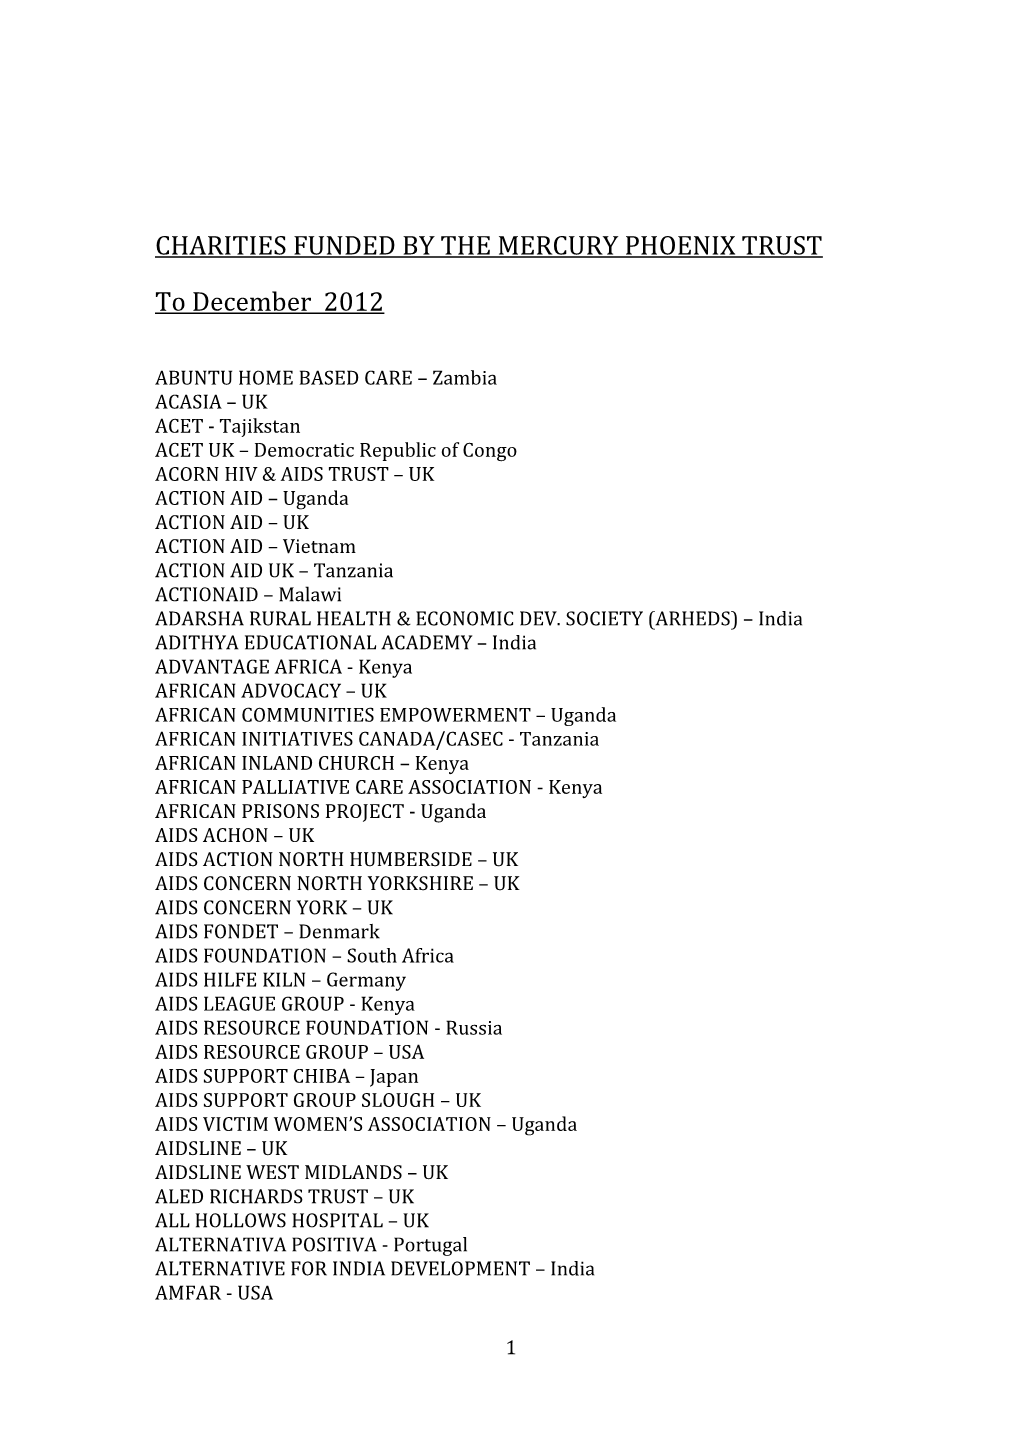 Charities Funded by the Mercury Phoenix Trust